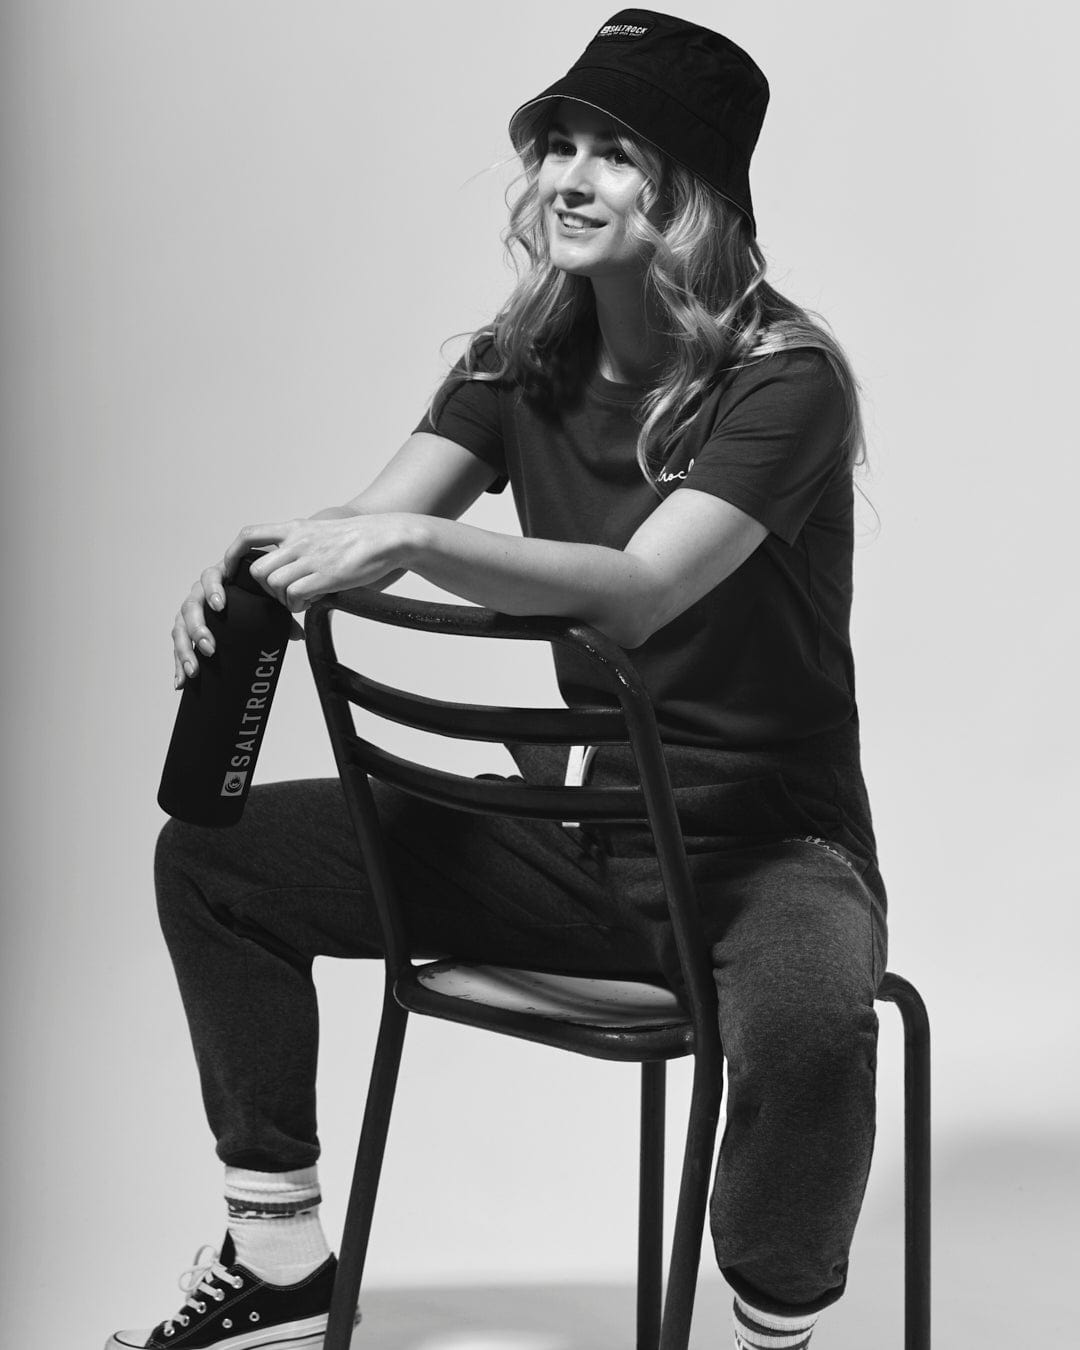 A black and white photo of a woman sitting on a chair wearing the Saltrock Velator Women's Short Sleeve T-Shirt in Navy, in a core classic style.